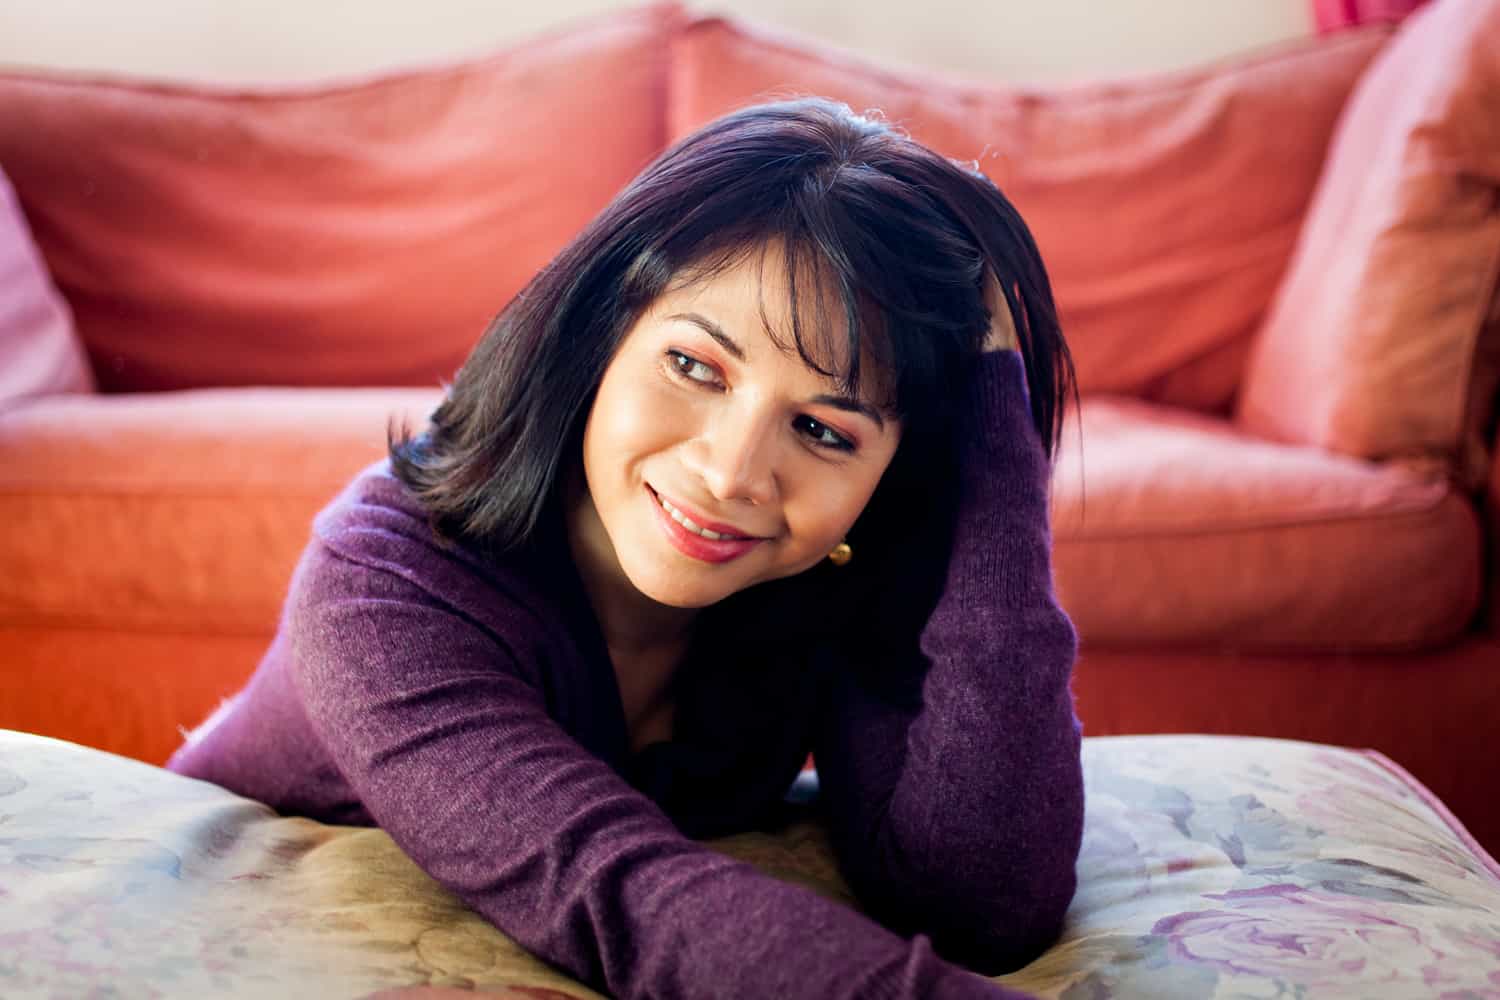 Woman with short black hair wearing purple sweater for an article on how to look slimmer in photos